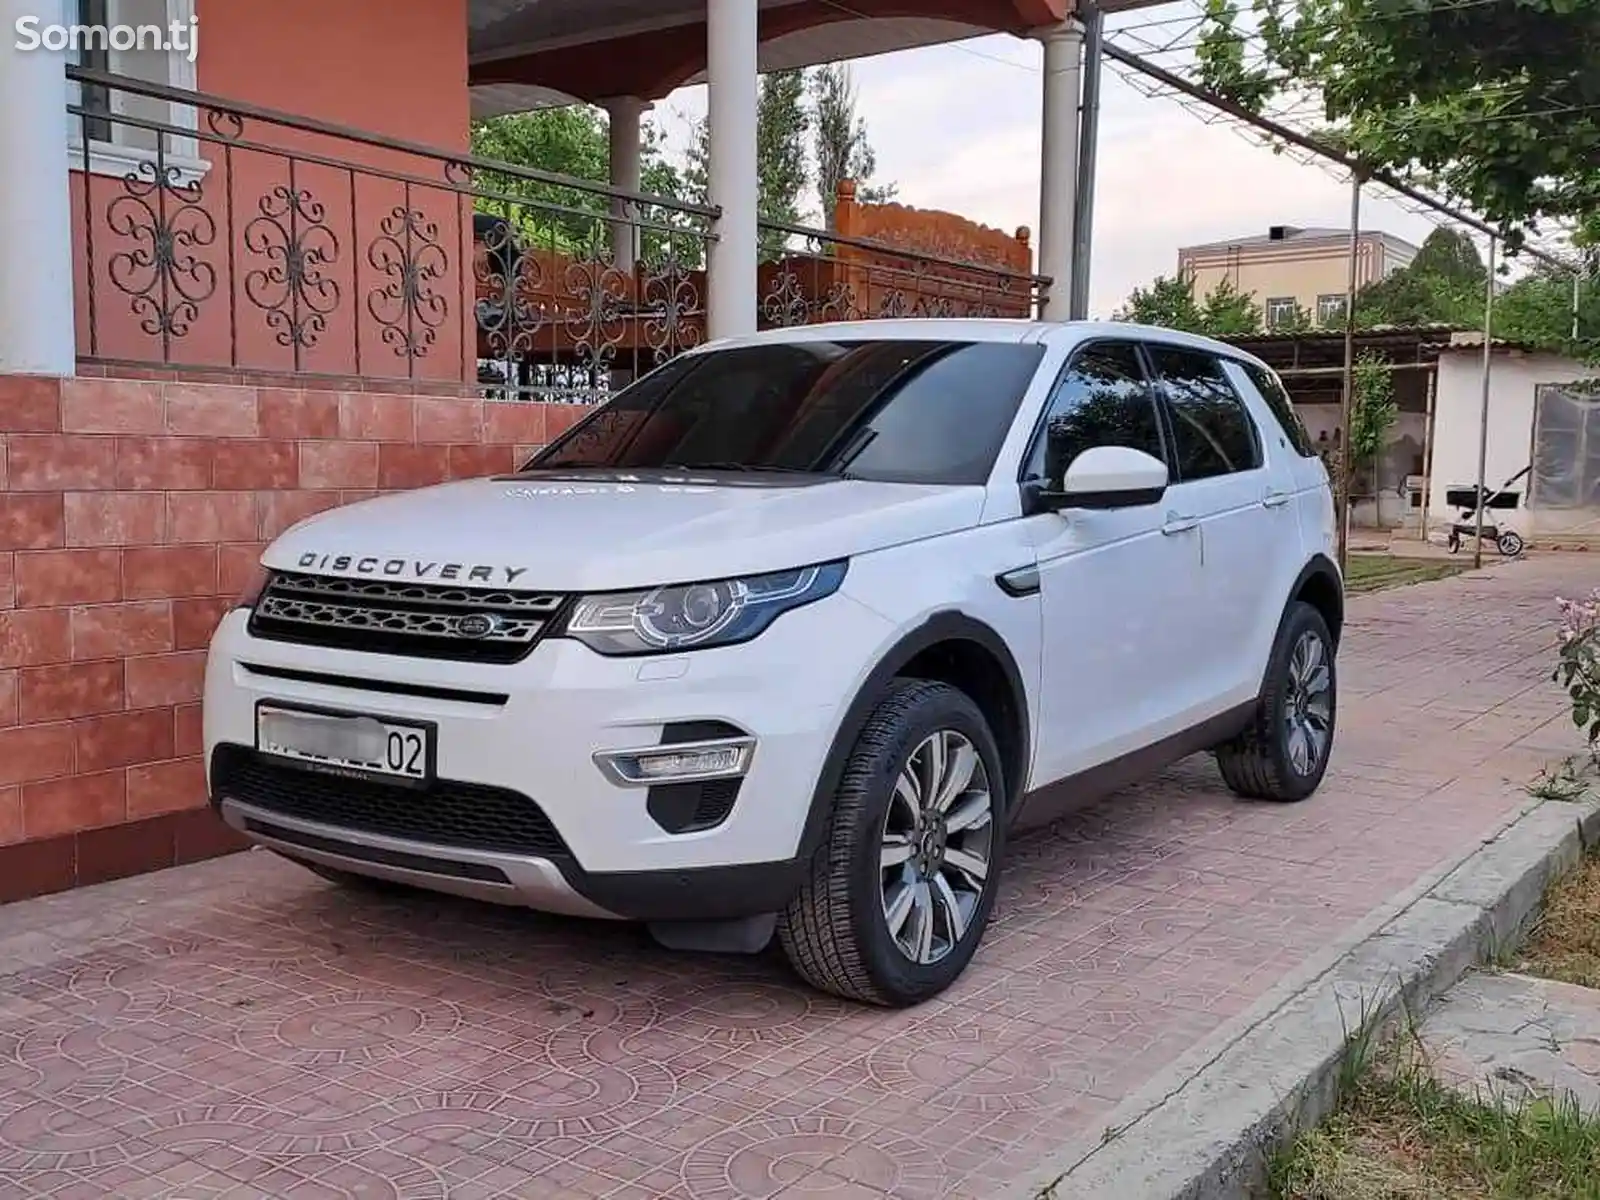 Land Rover Discovery, 2016-3